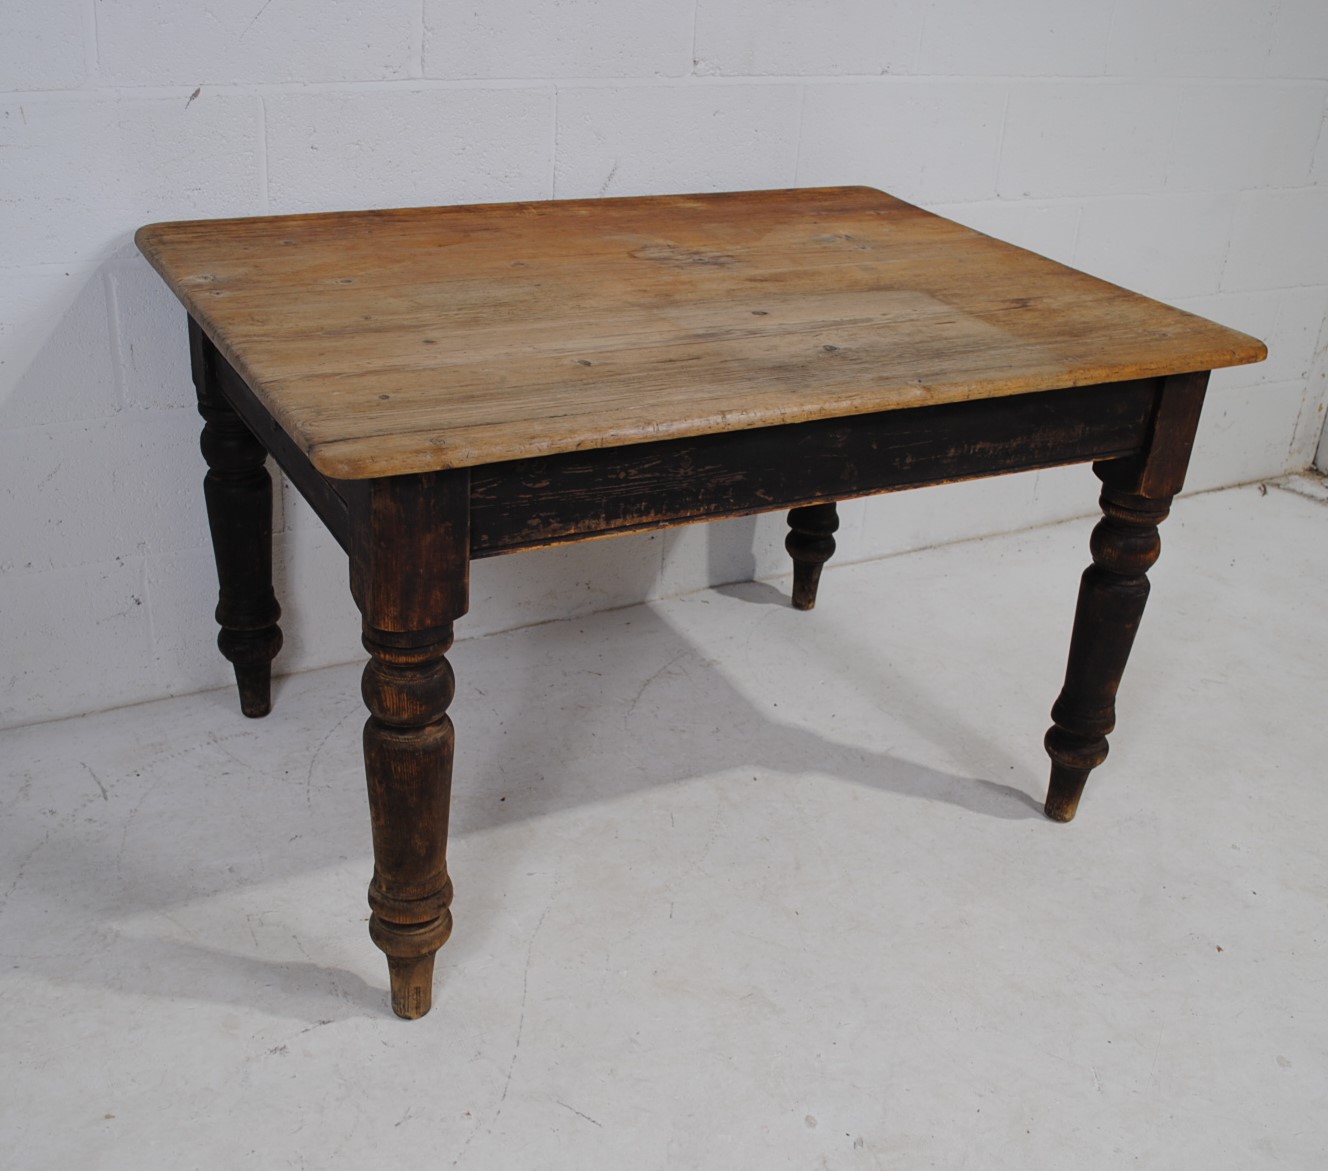 An antique pine farmhouse table, with single drawer, raised on turned legs - length 91cm, depth - Image 3 of 6